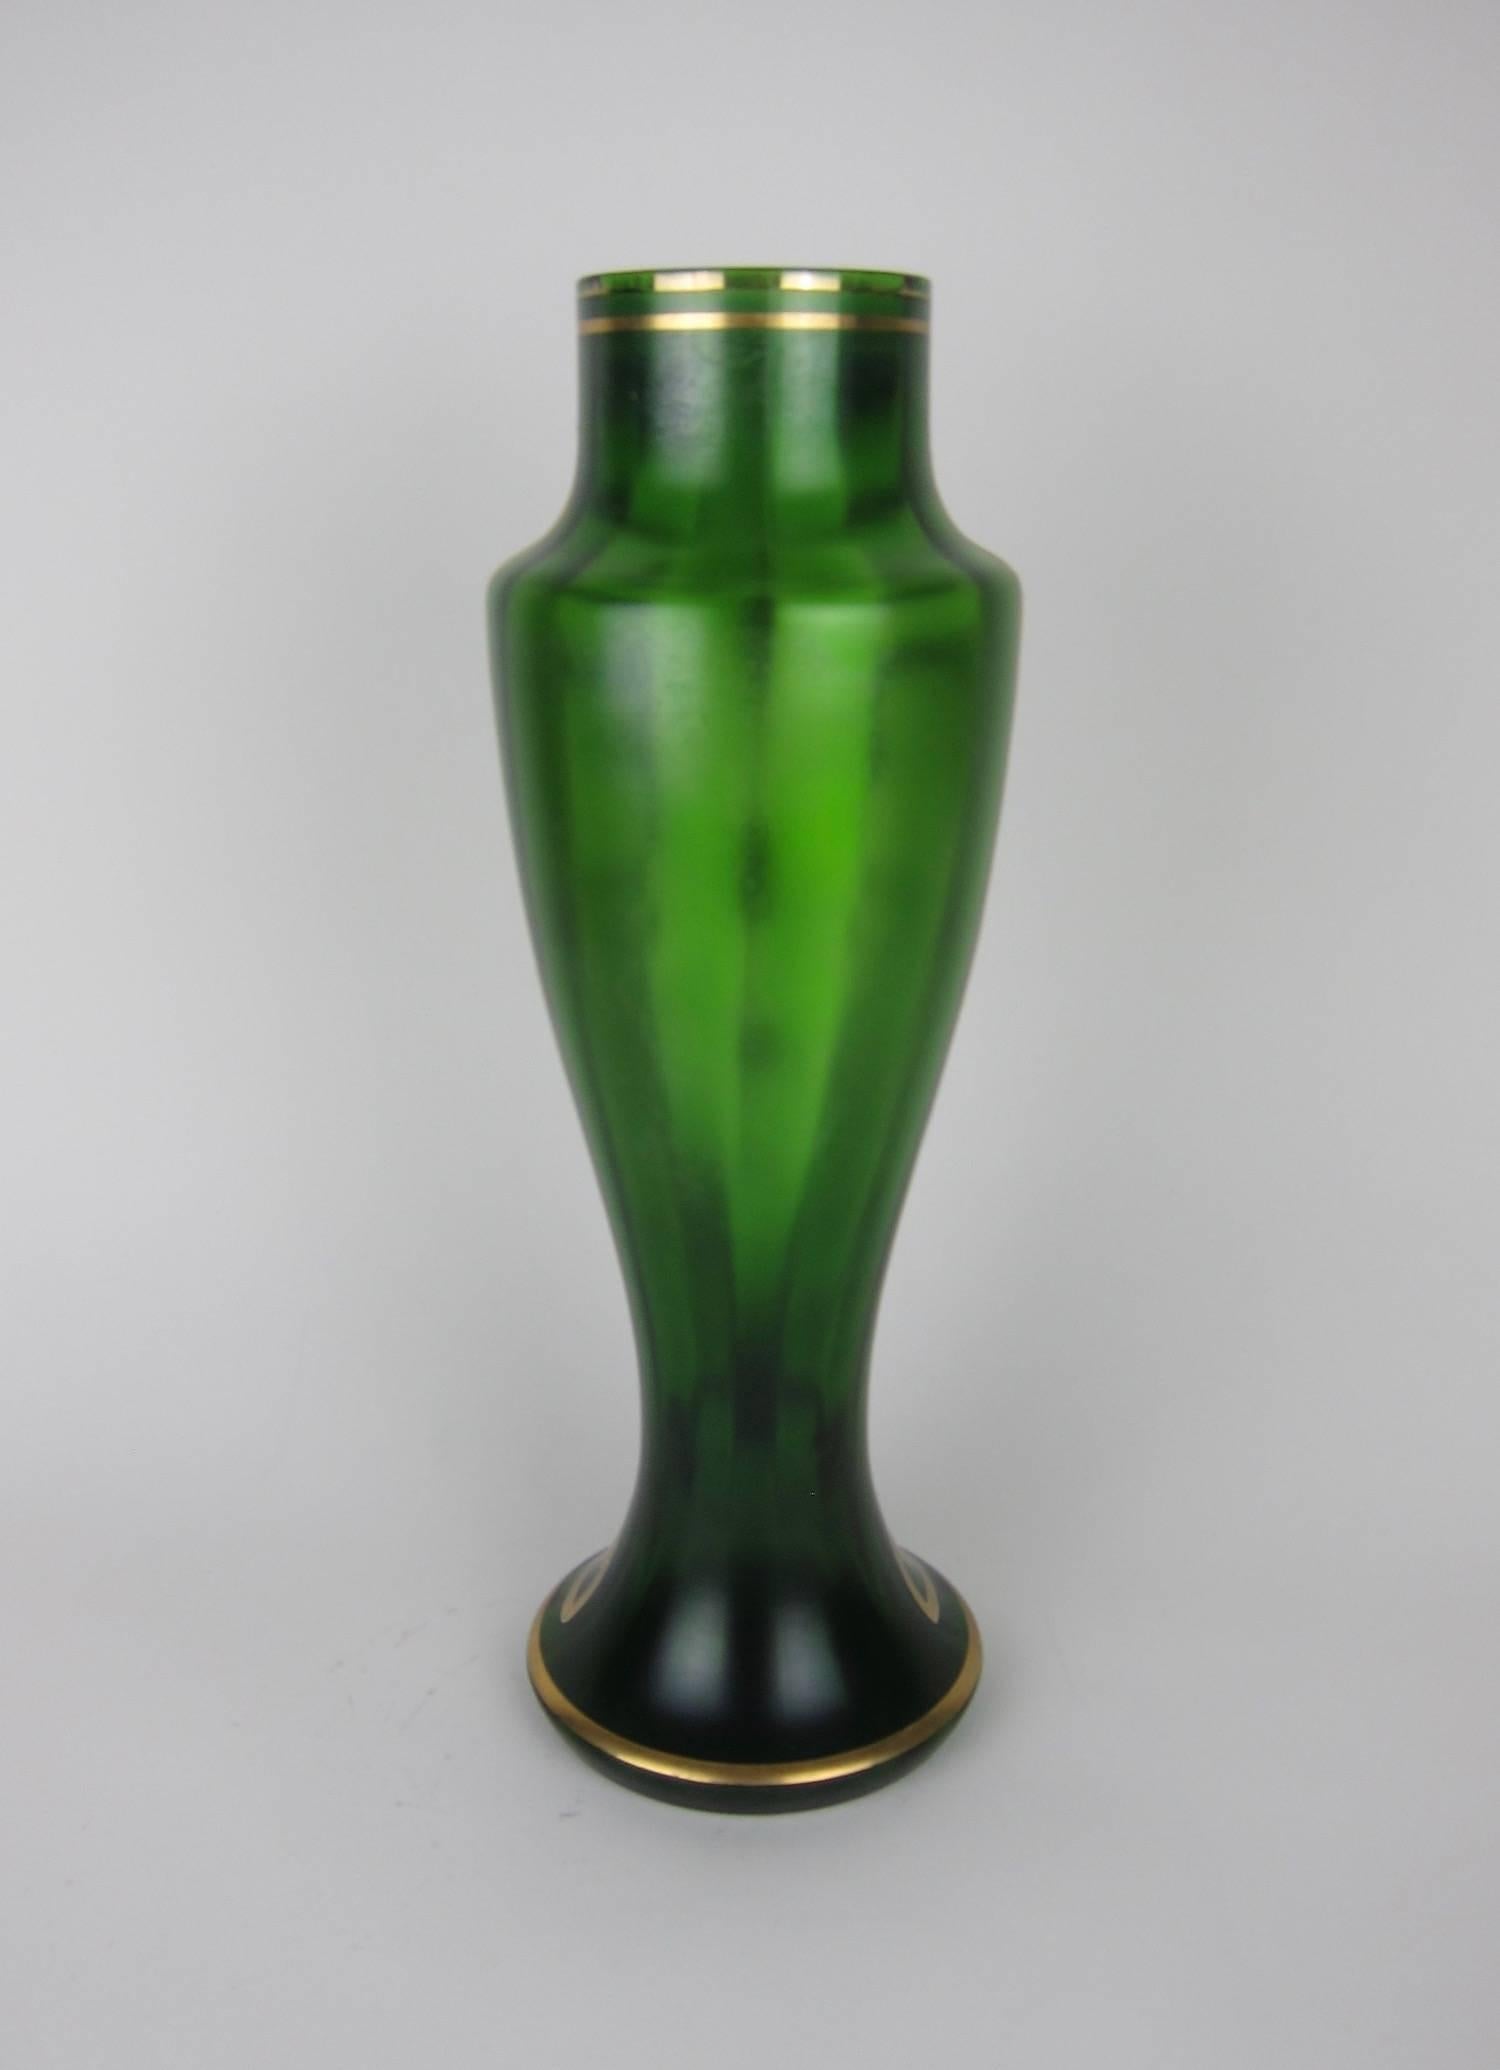 Antique Jeweled and Enameled Secessionist Green and Gold Glass Vase  2